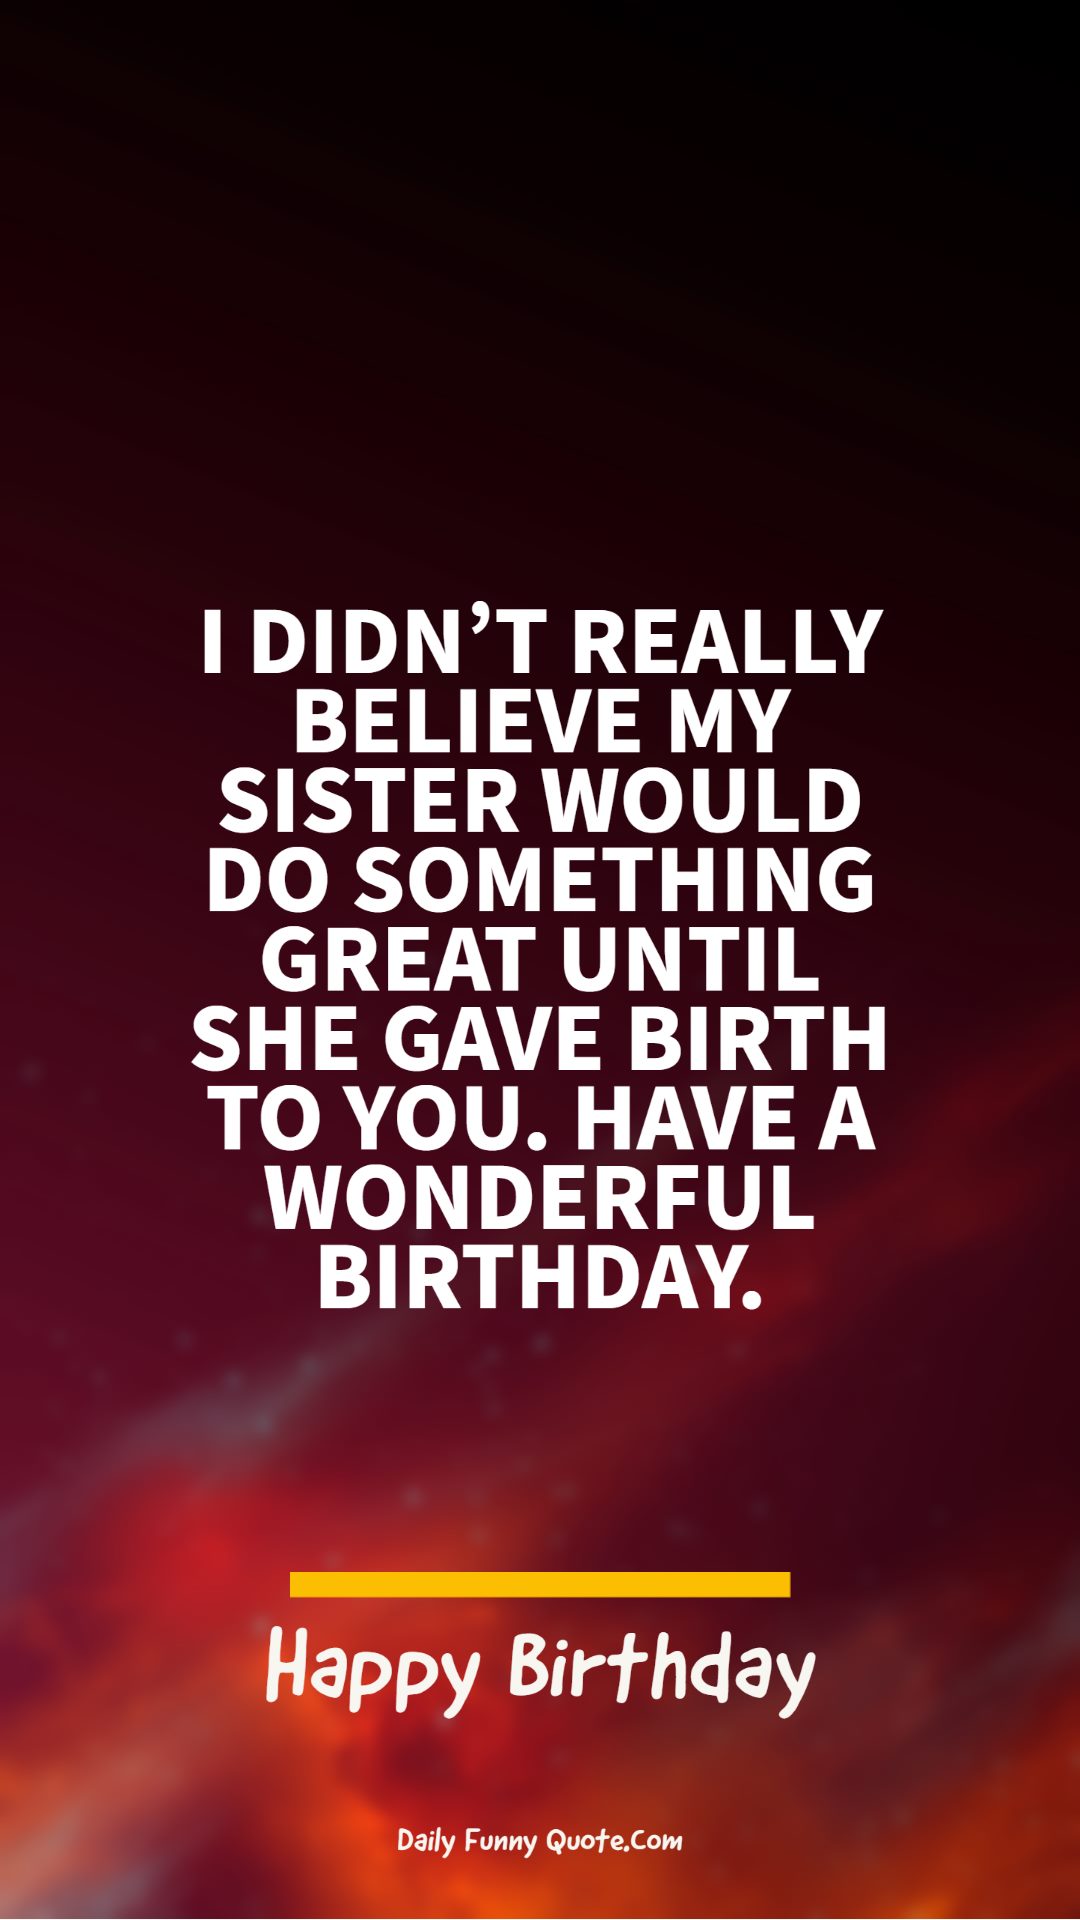 70 Happy Birthday Wishes for Niece - Best Quotes About Niece –  DailyFunnyQuote